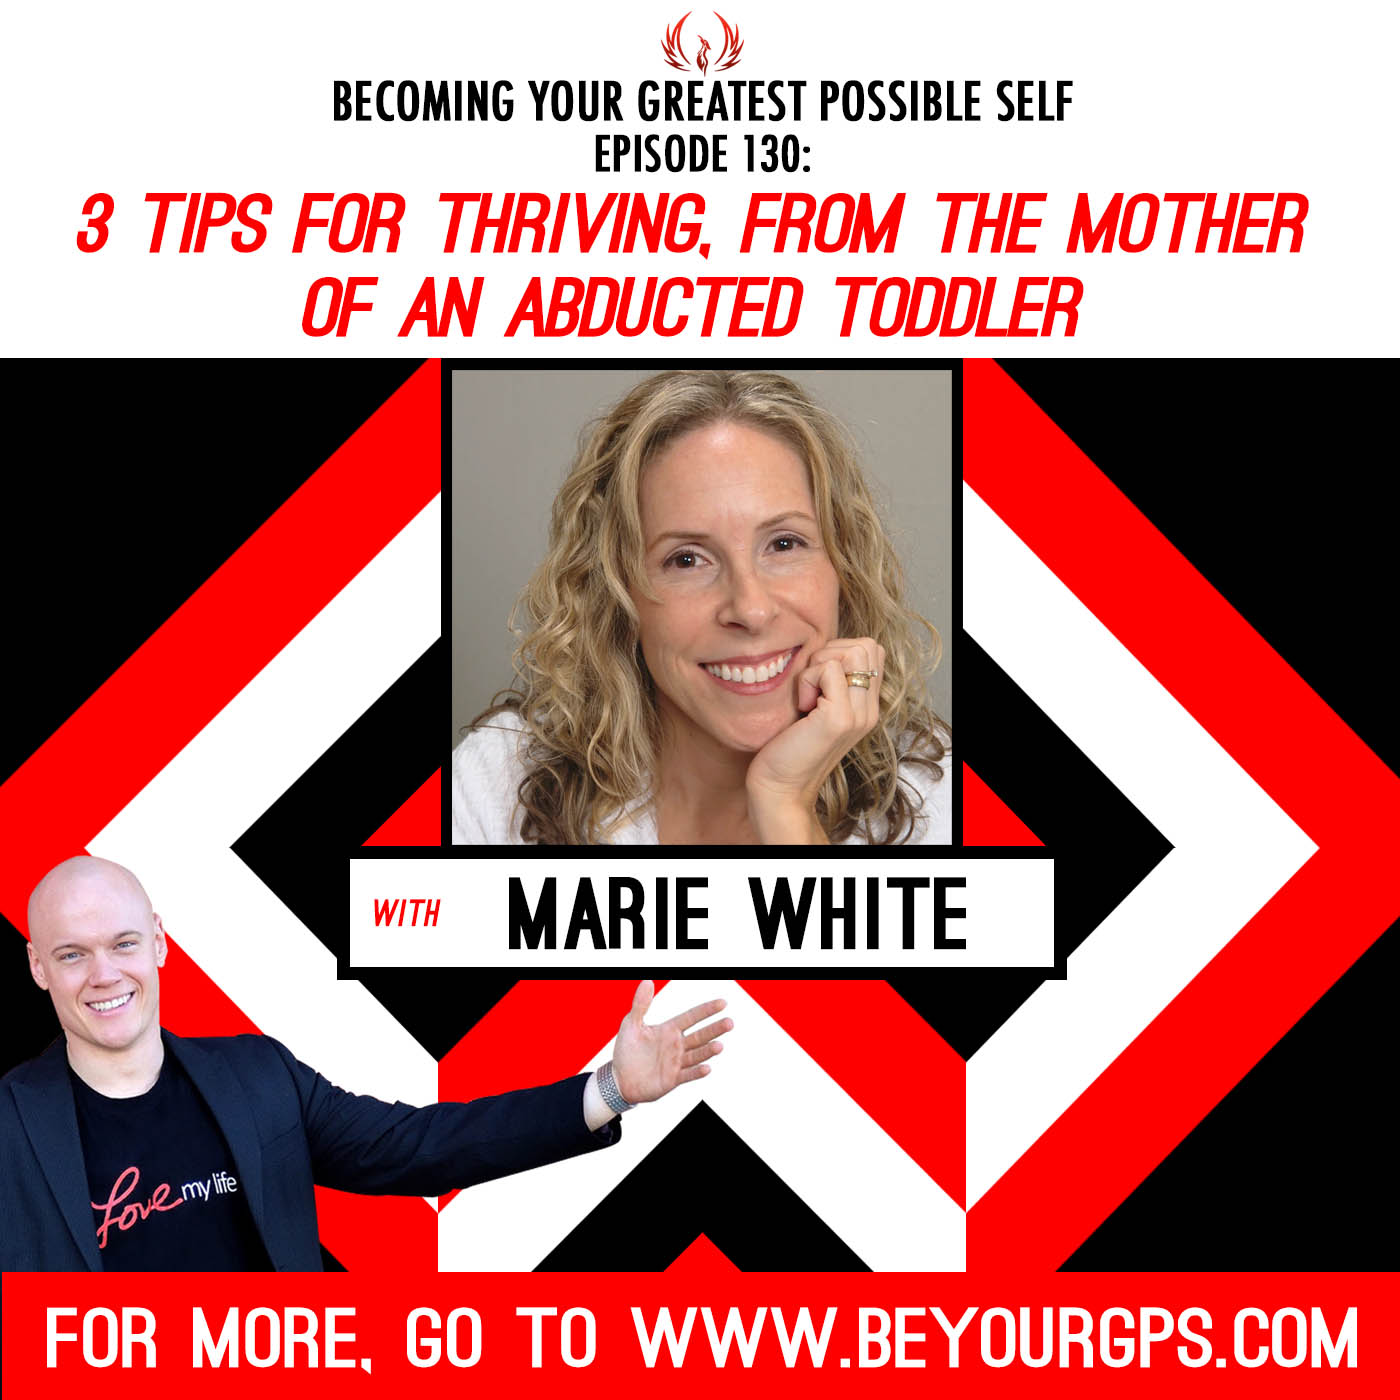 3 Tips for Thriving, from the Mother of an Abducted Toddler with Marie White